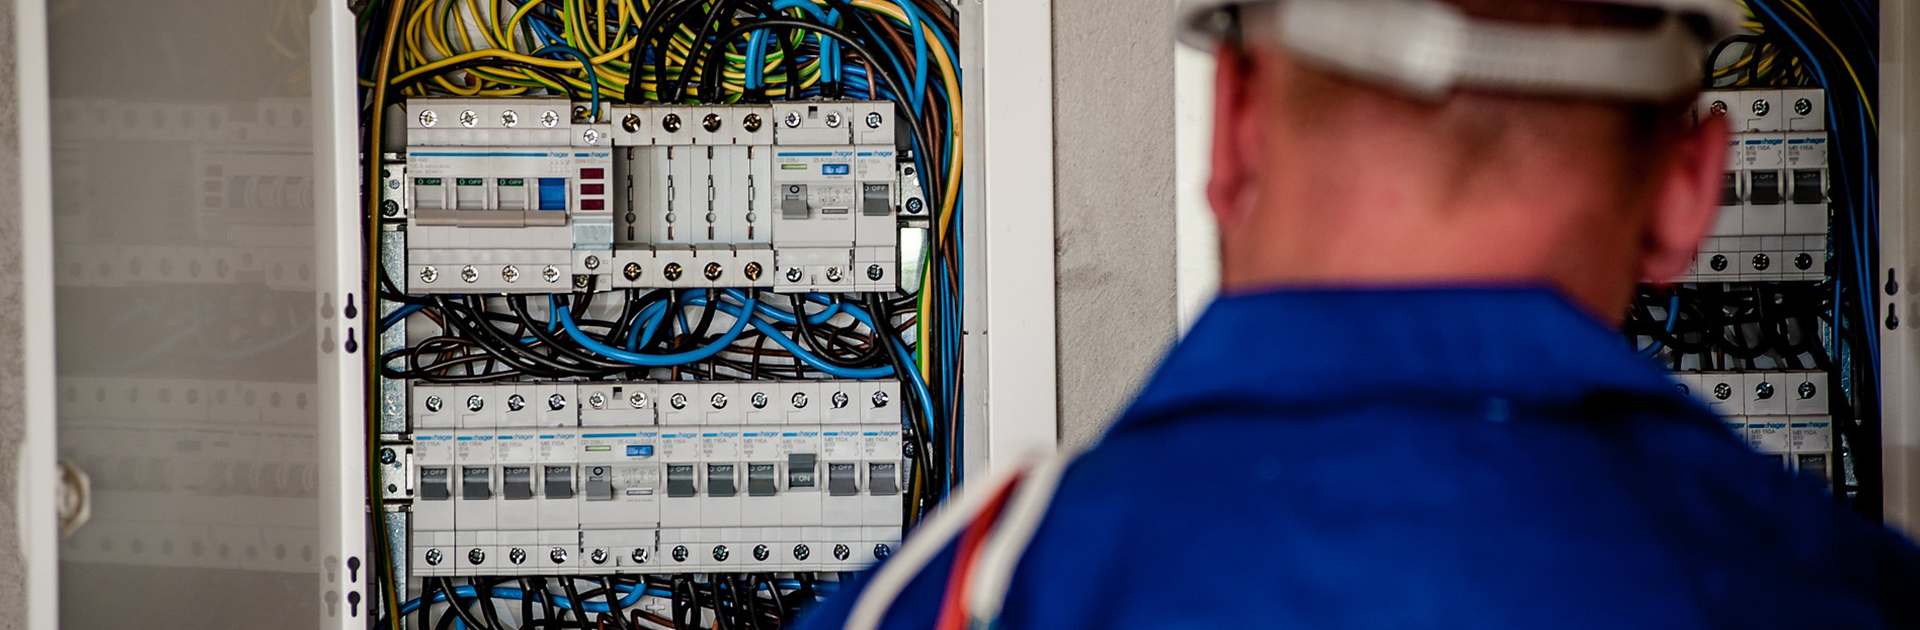 electrician wearing a blue shirt working on an electrical panel